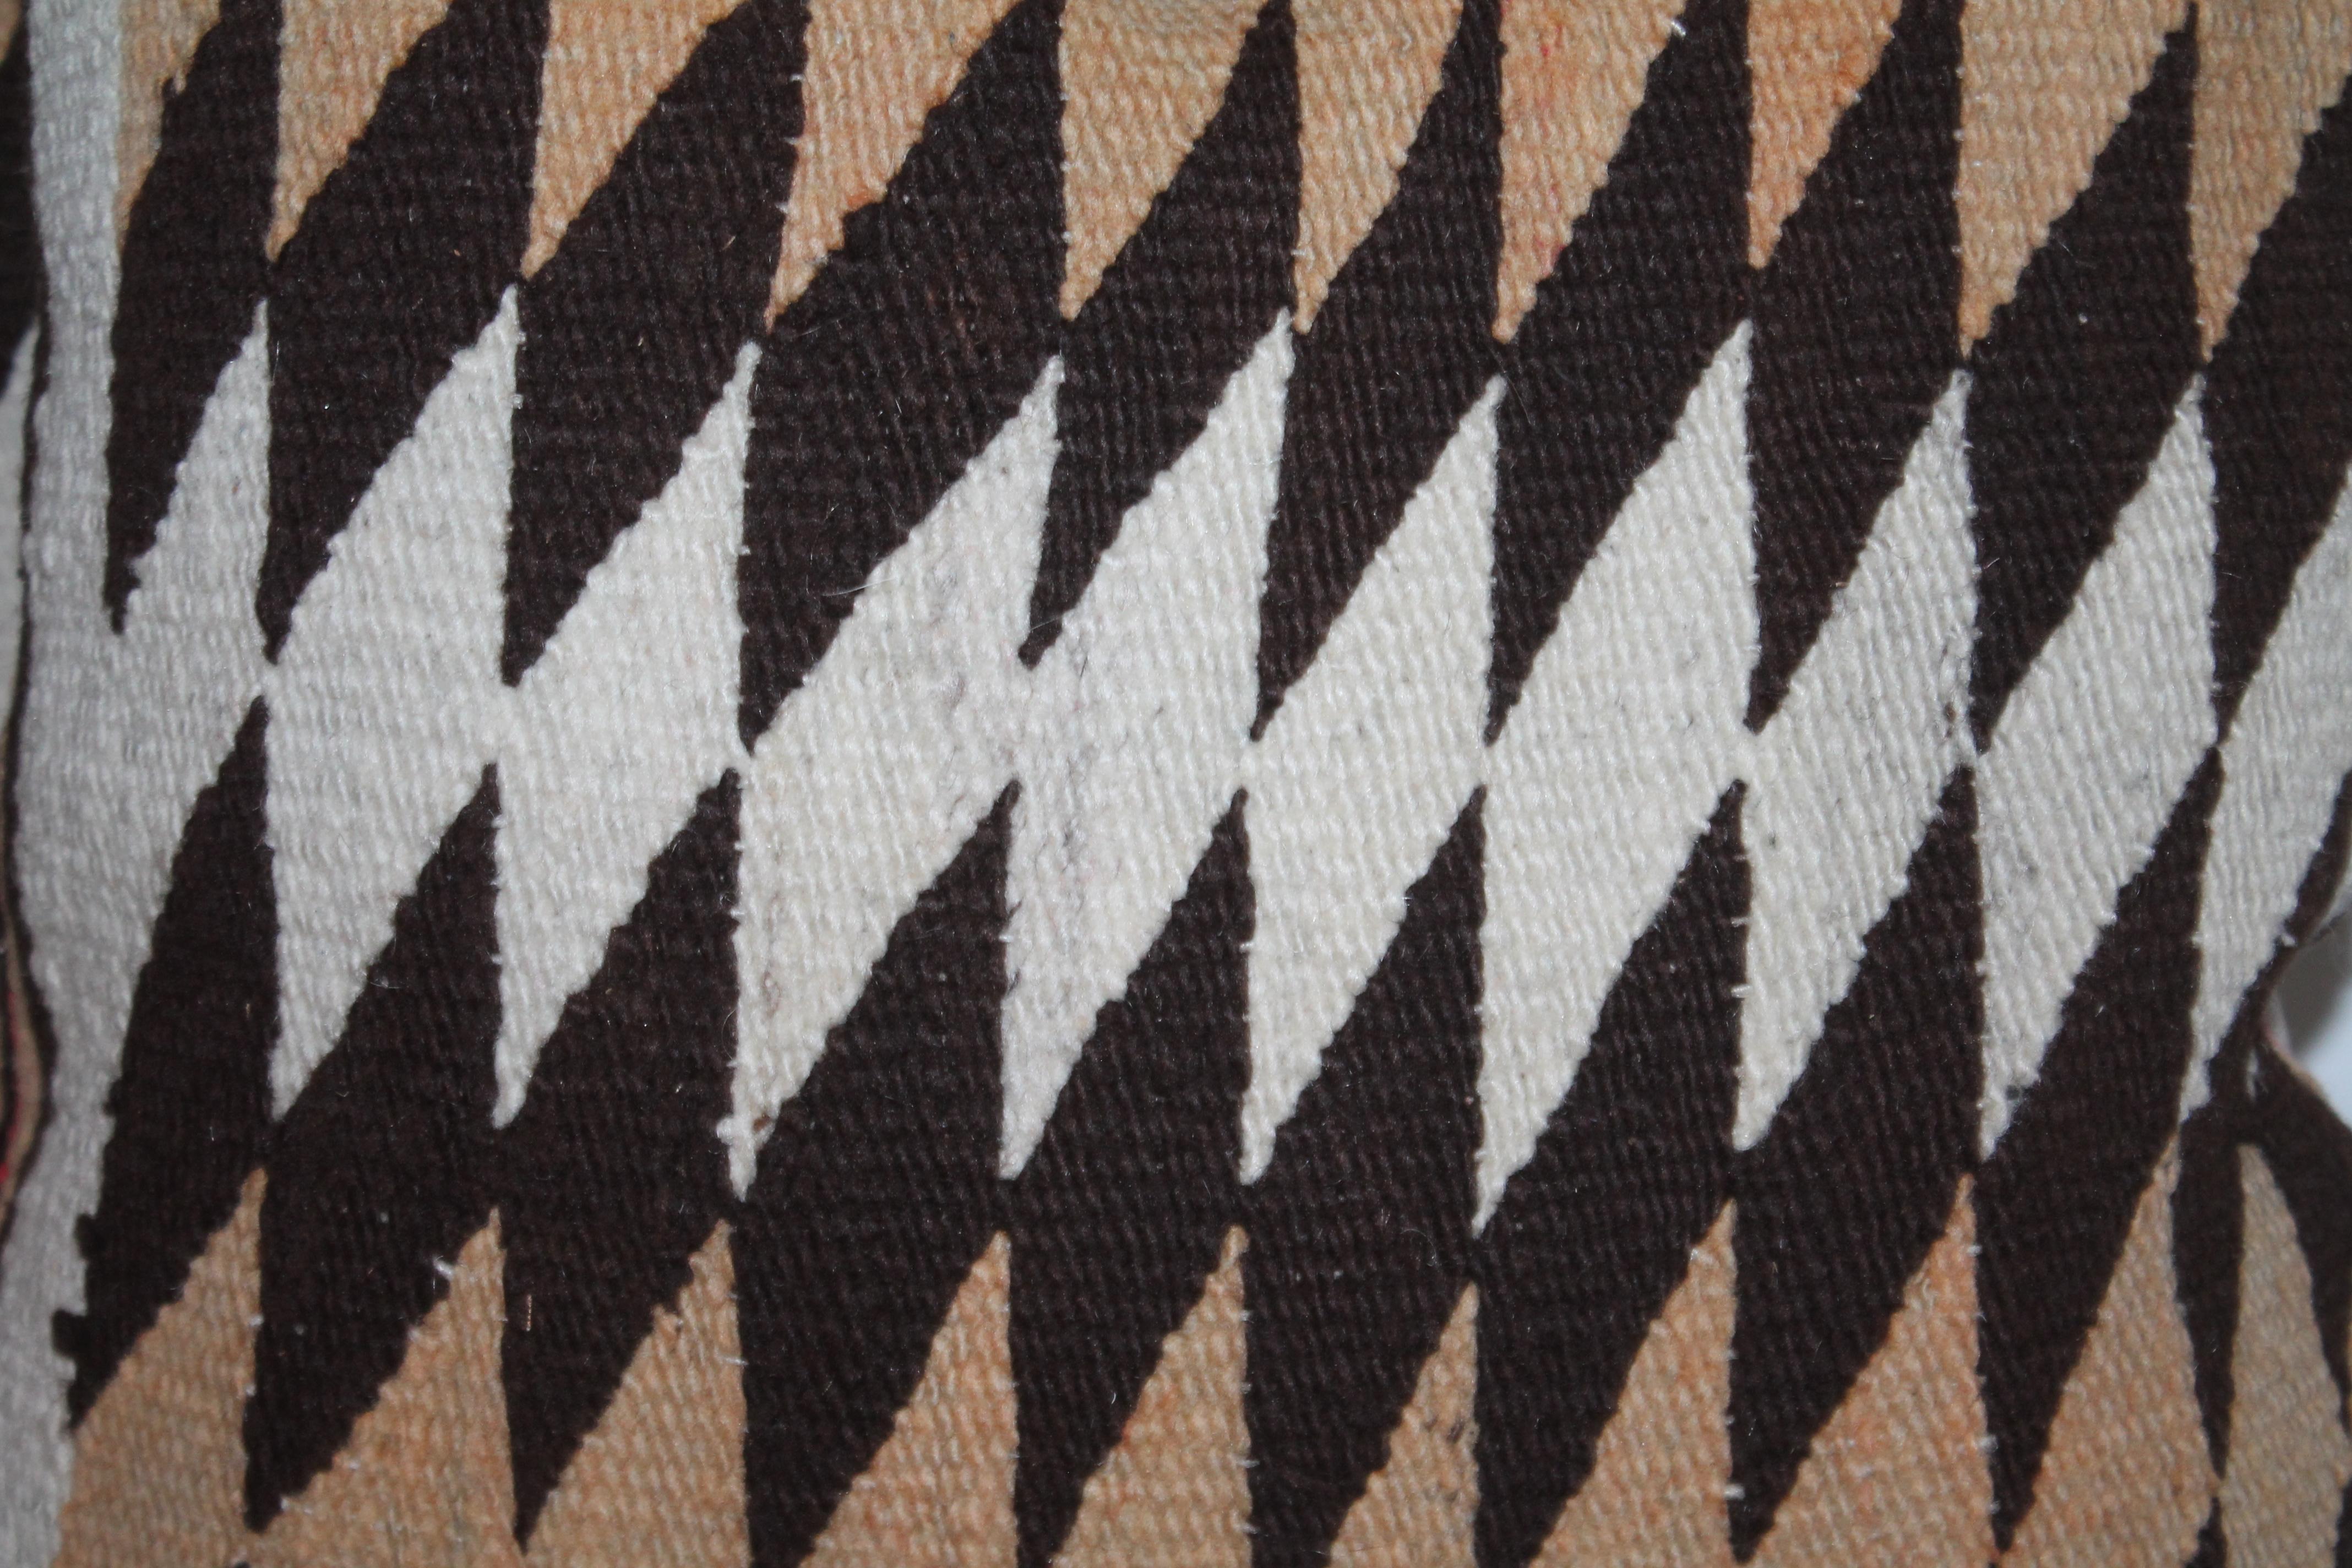 Hand-Crafted Navajo Indian Geometric Weaving Pillows, Pair For Sale